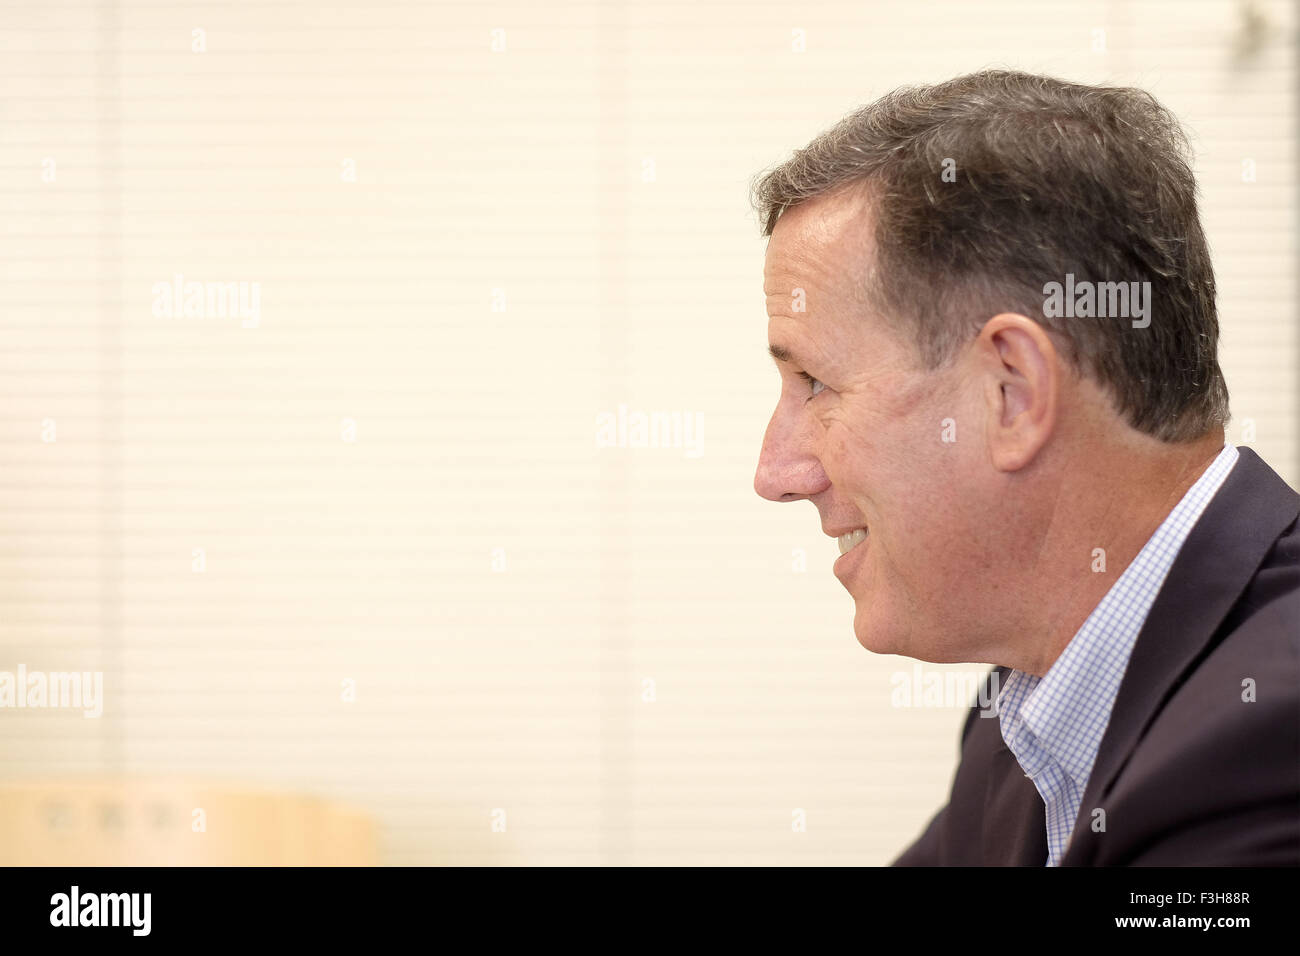 Sioux City, IOWA, USA. 7th Oct, 2015. Republican presidential candidate and former U.S. Sen. RICK SANTORUM (R-PA) talks with a local TV reporter Wednesday, Oct. 7, 2015, at Briar Cliff University, a Catholic university. He told the reporter he is not worried about raising a lot of money, but that his campaigning is meeting and talking with people. © Jerry Mennenga/ZUMA Wire/Alamy Live News Stock Photo